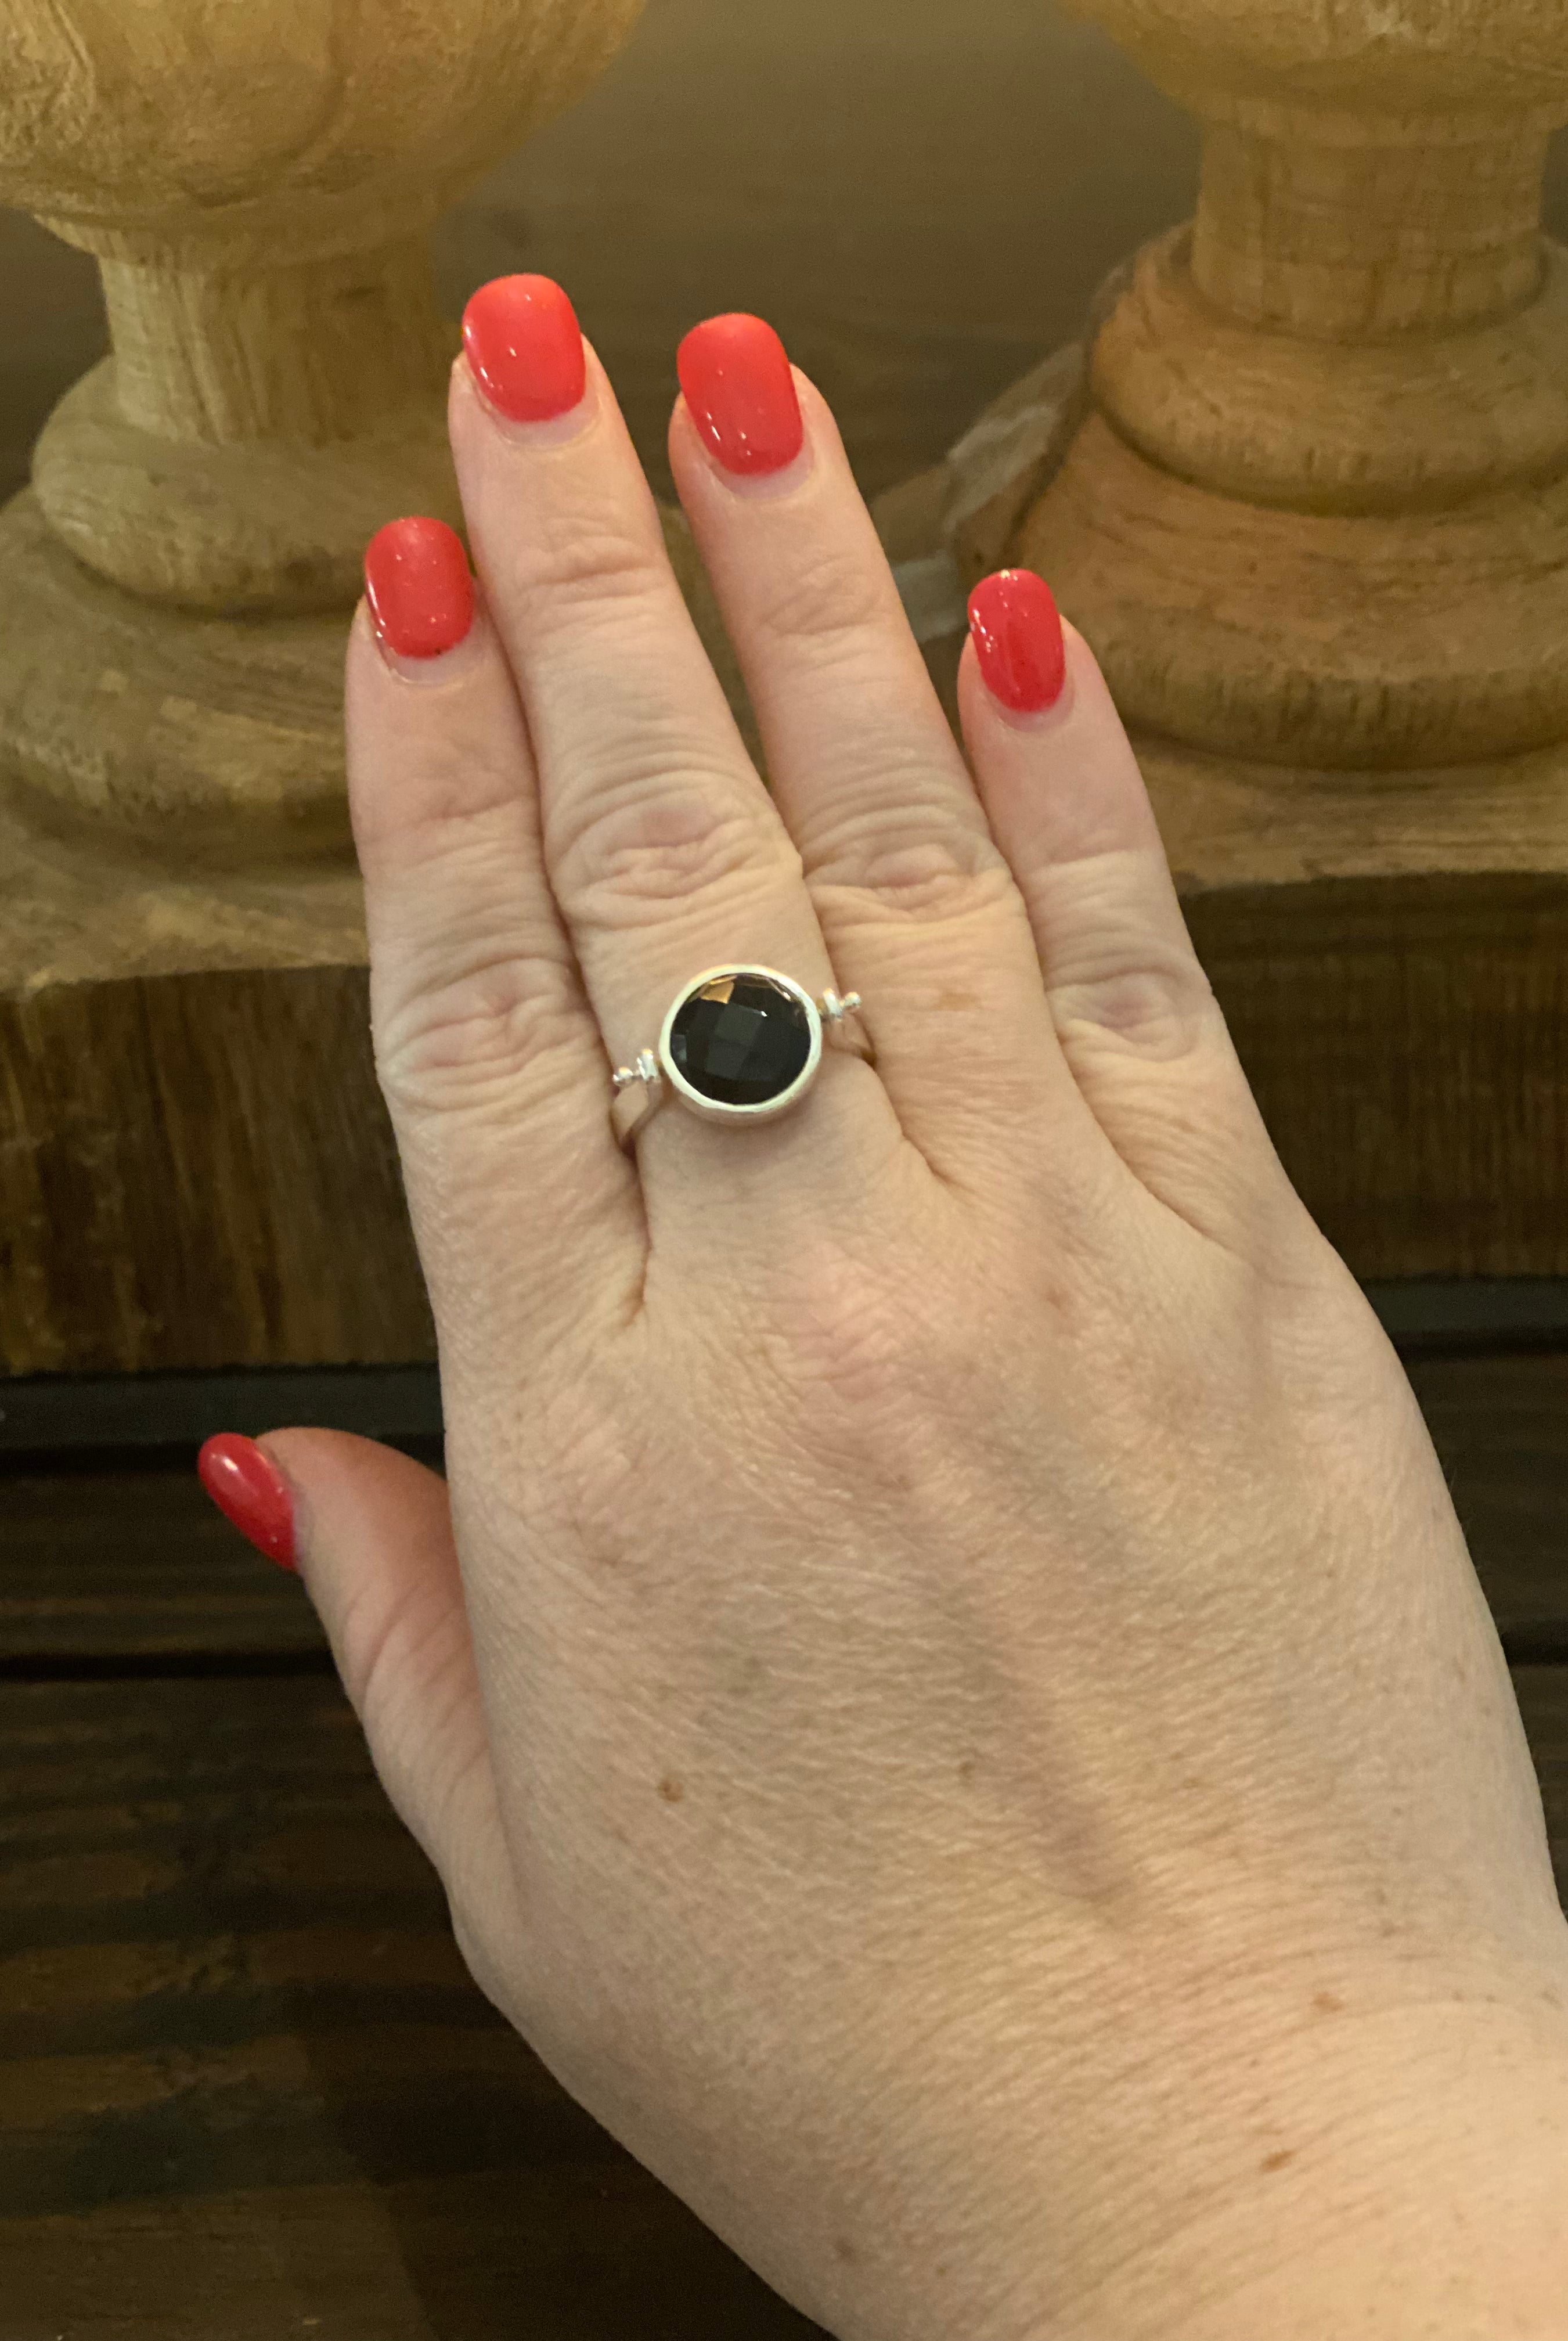 Duo Flip Rainbow Moonstone, Black Onyx 925 Sterling Silver Ring Size 7 - Practical Magic Store